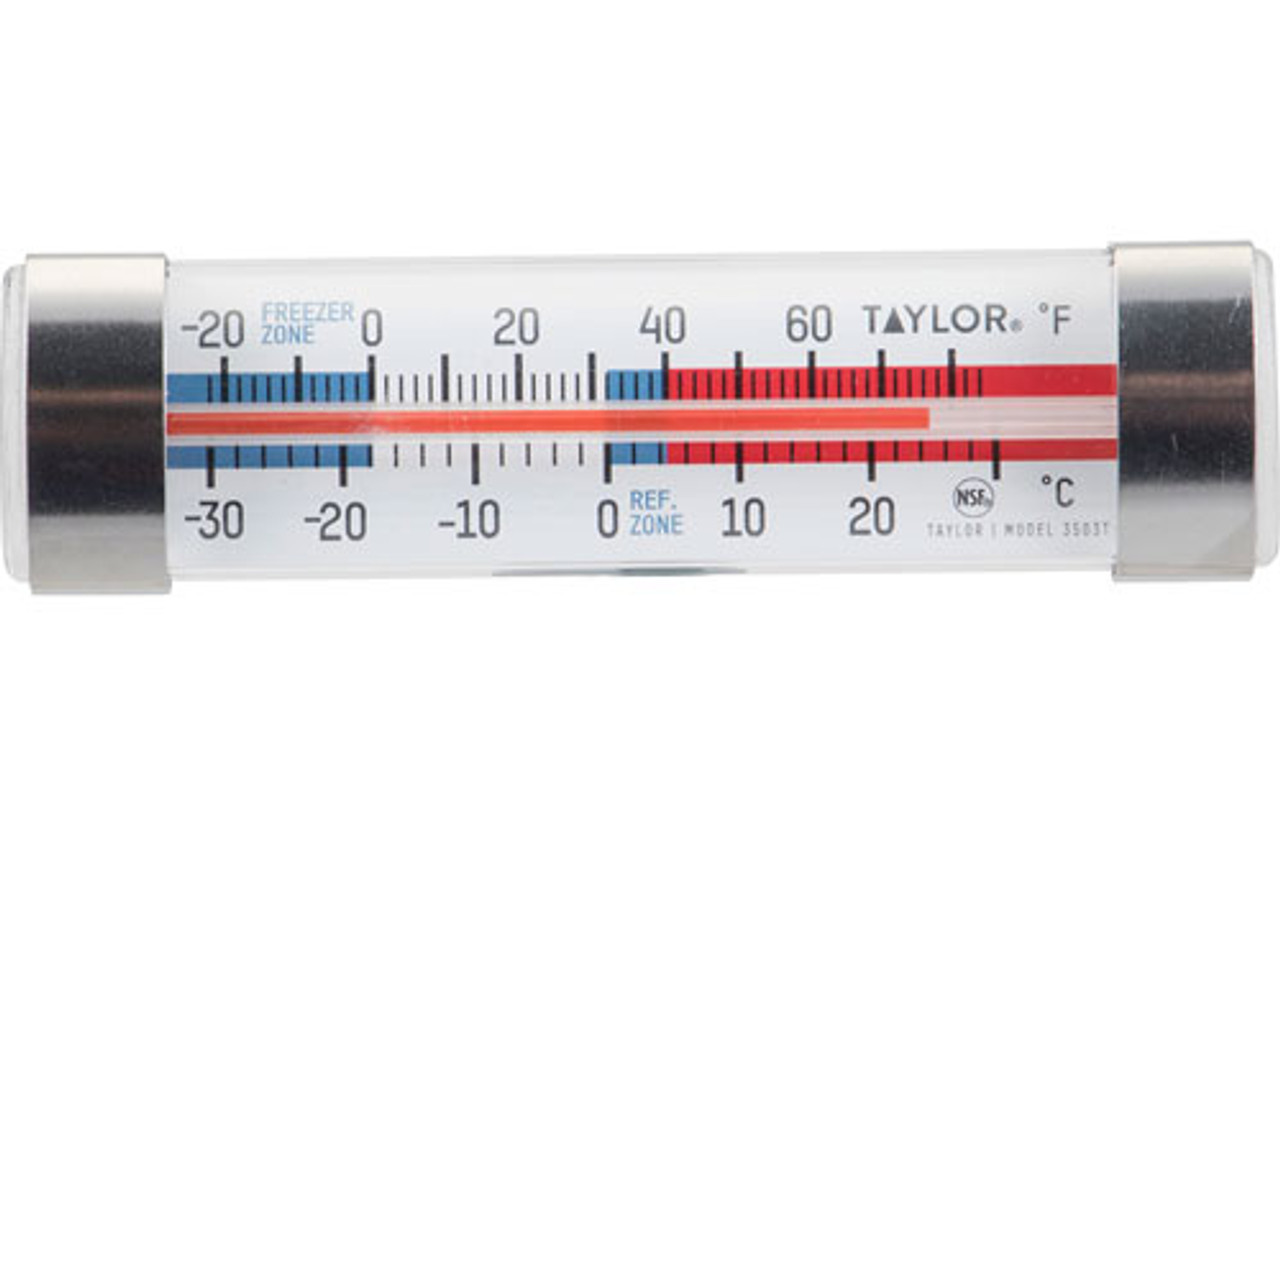 Refrig/Freezer Thermomet Er - Replacement Part For Taylor Thermometer 3503FS